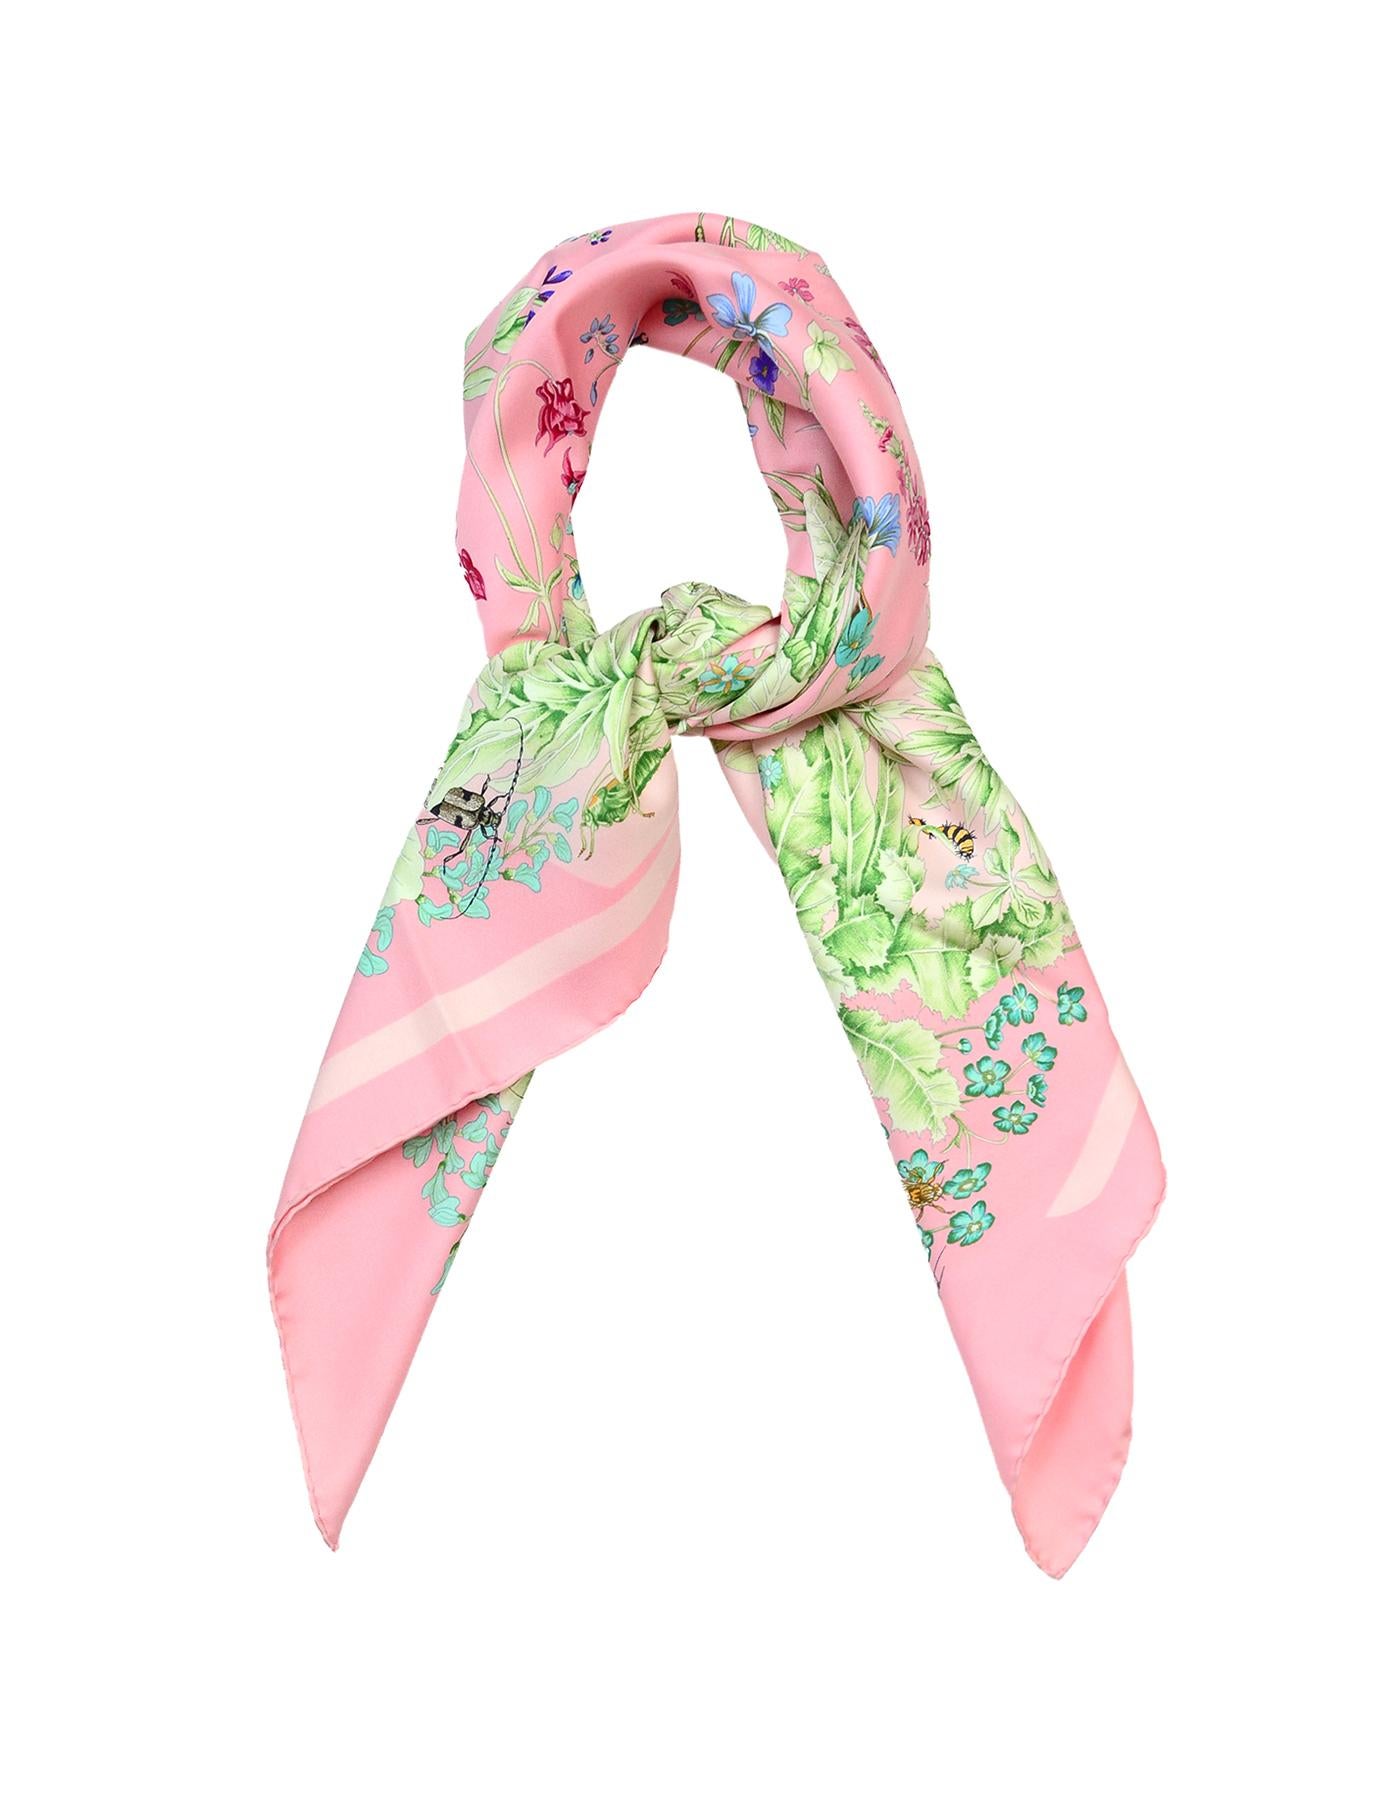 Hermes Pink Floral/Insect La Prairie 90cm Silk Scarf

Made In: France
Color: Pink, green, patterned
Materials: Silk
Overall Condition: Excellent pre-owned condition with exception of no tag
Estimated Retail: $385 + tax

Measurements: 
34.5